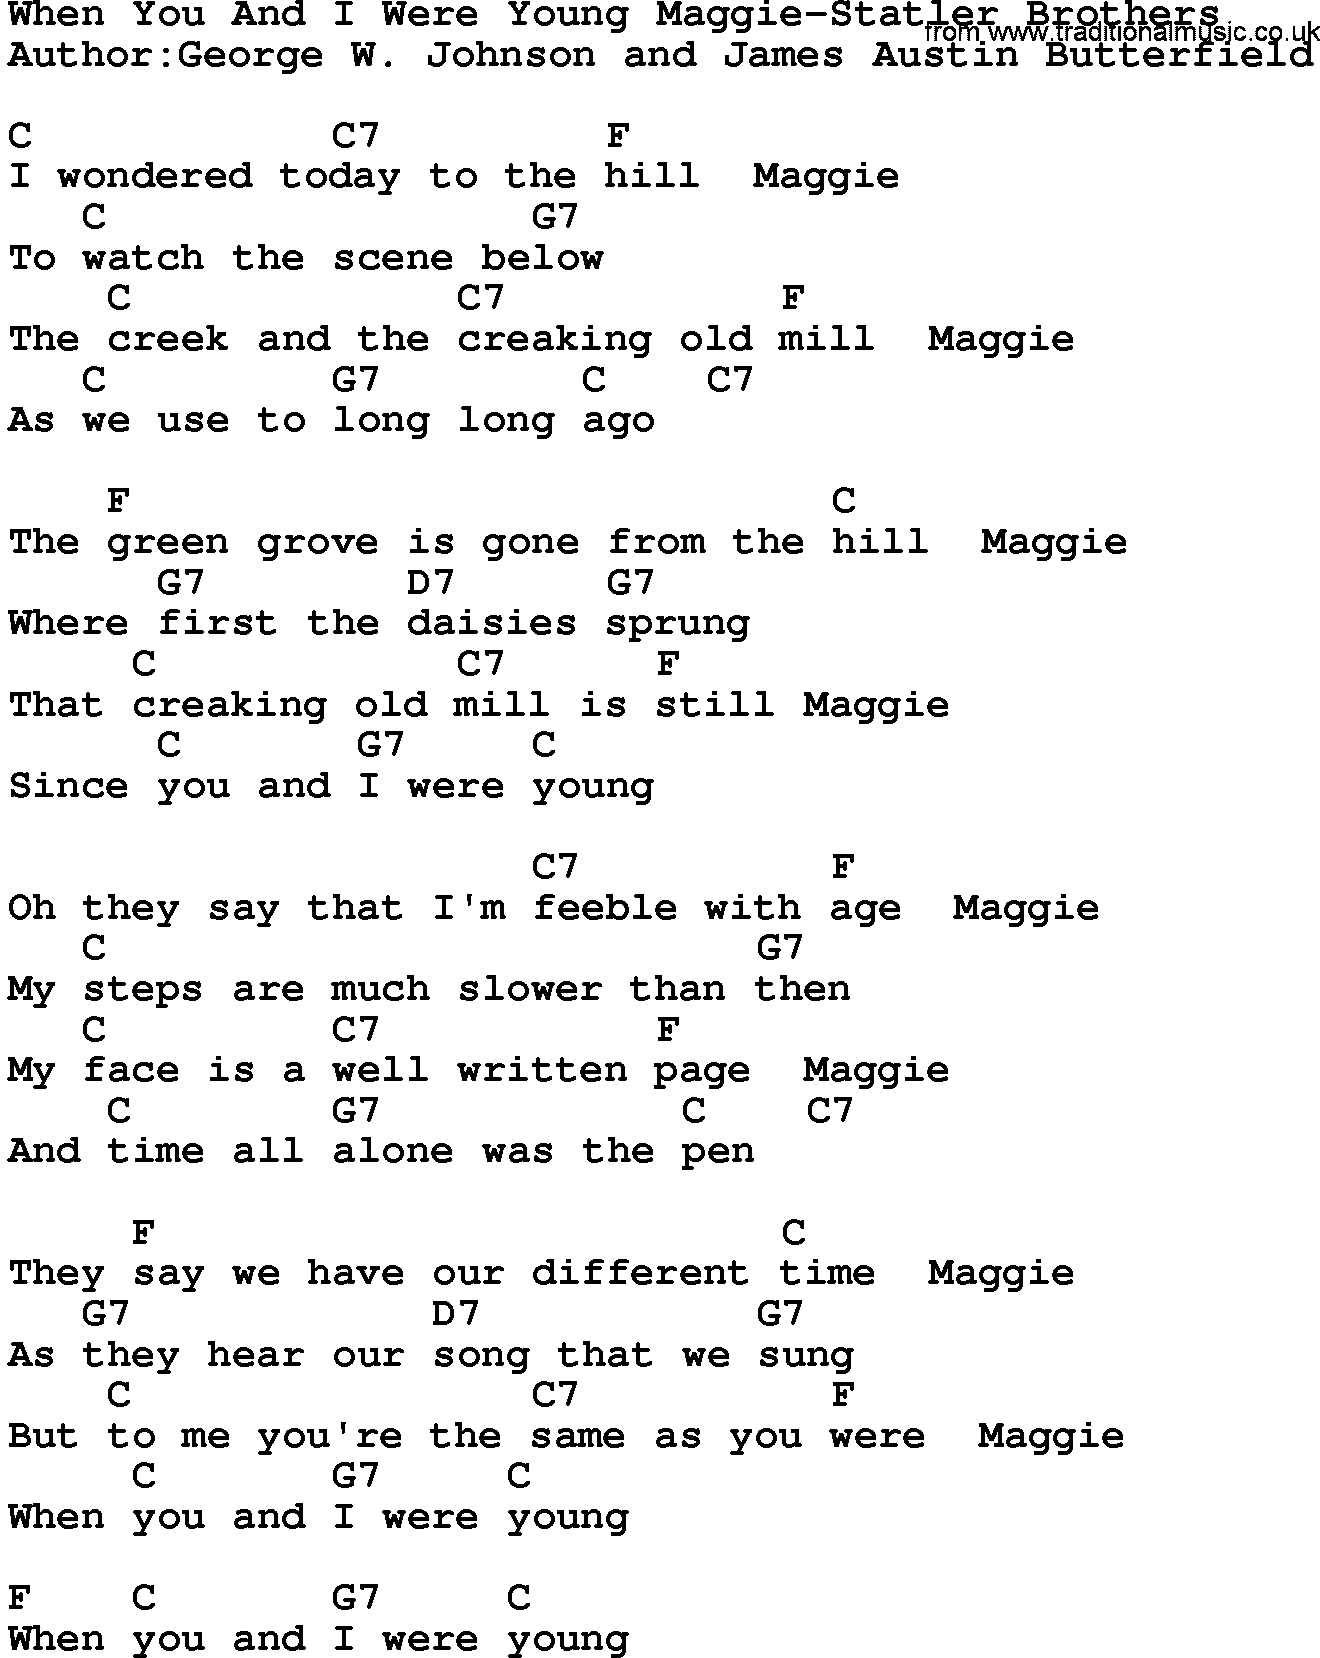 Country music song: When You And I Were Young Maggie-Statler Brothers lyrics and chords